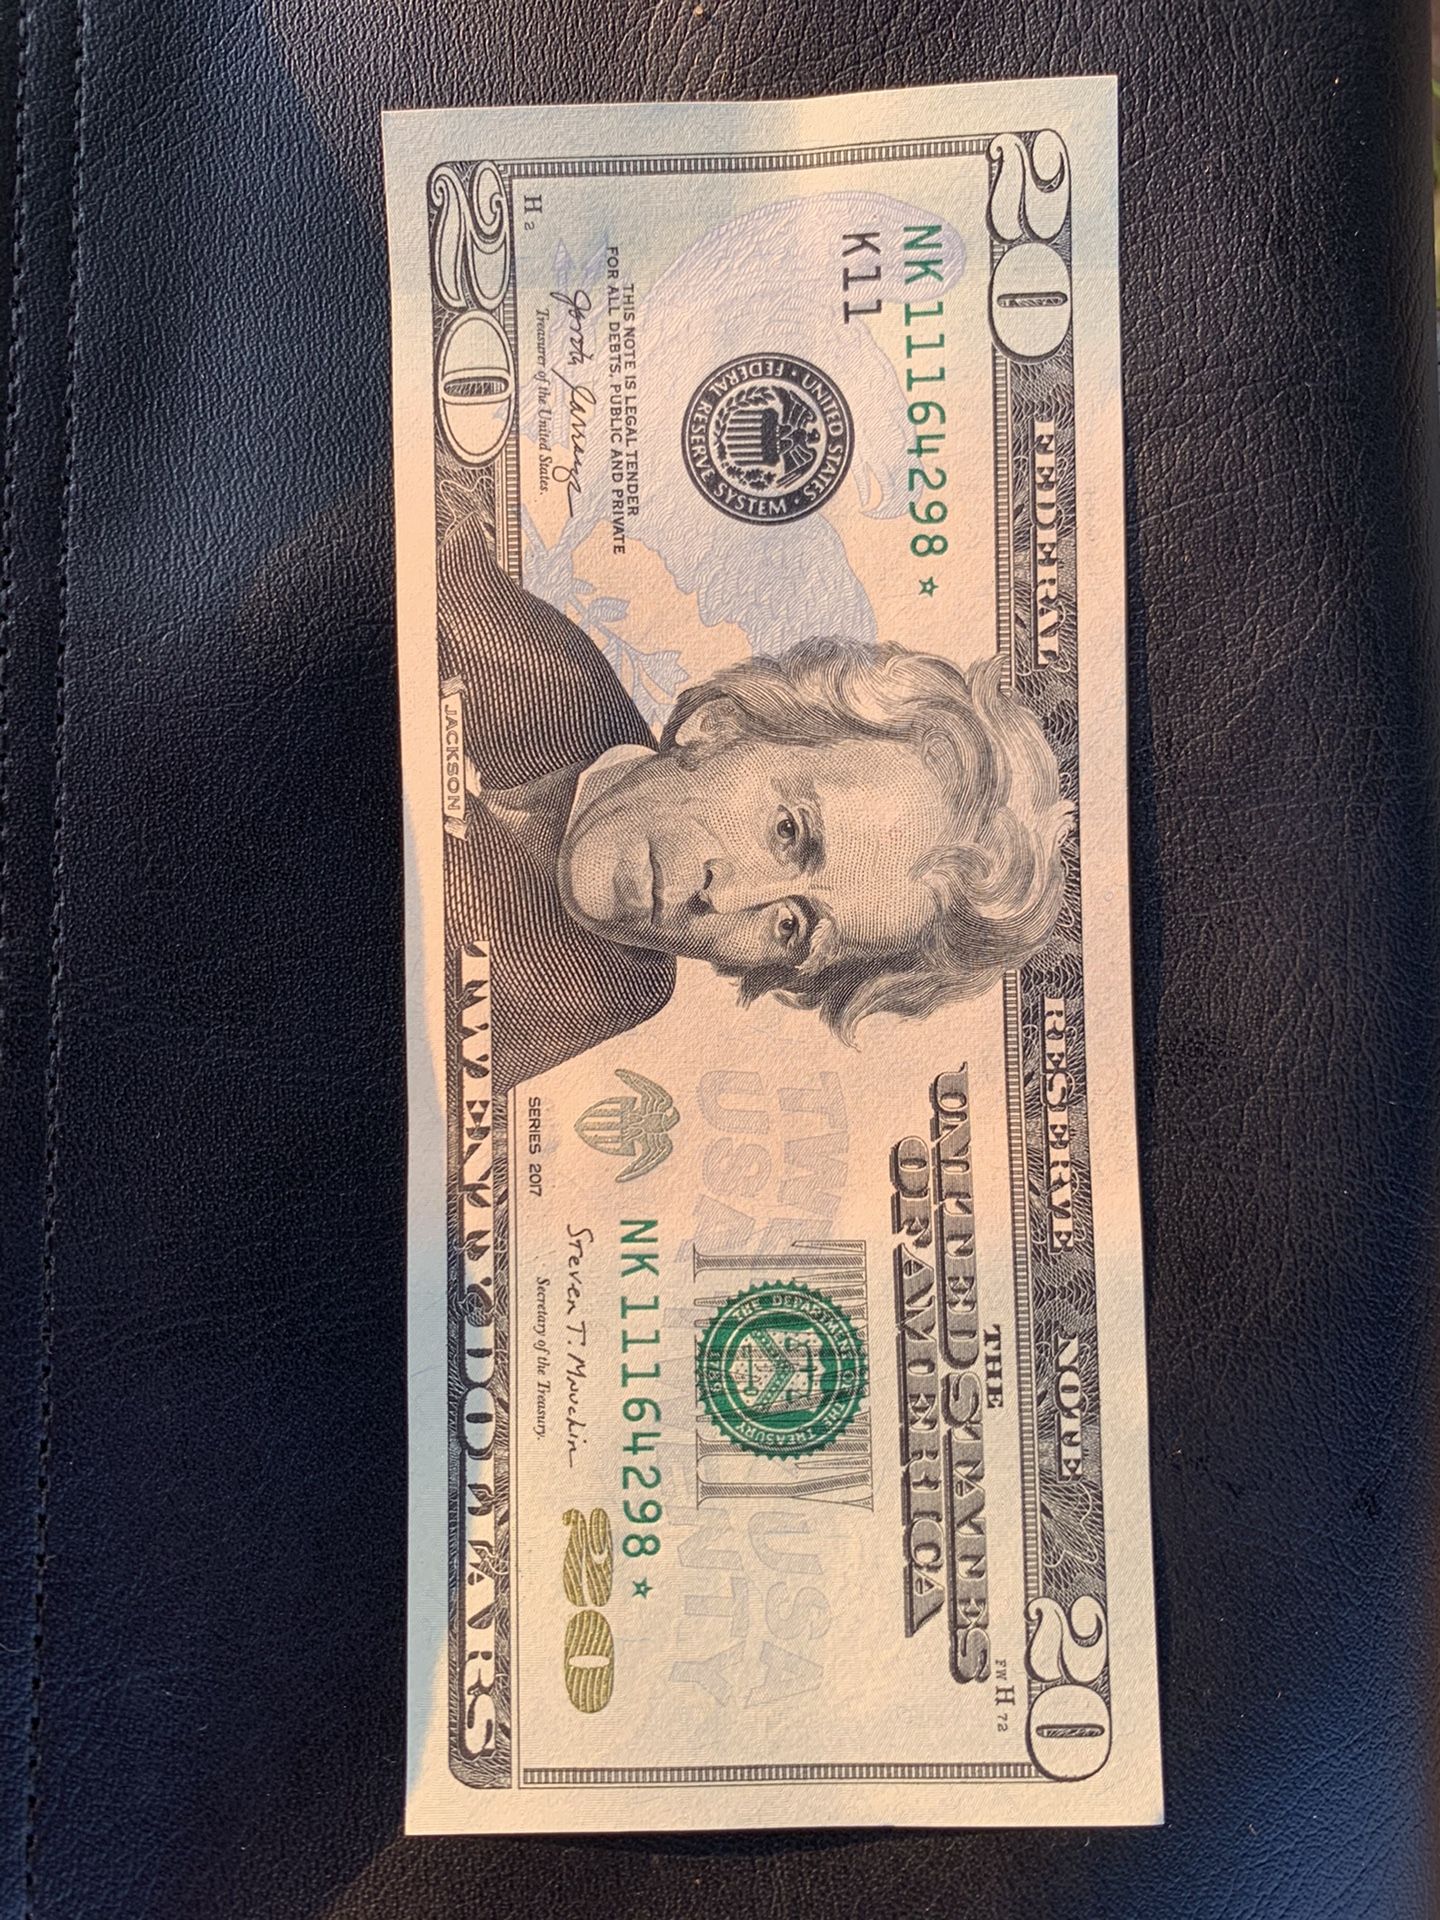 $20 Star Note!